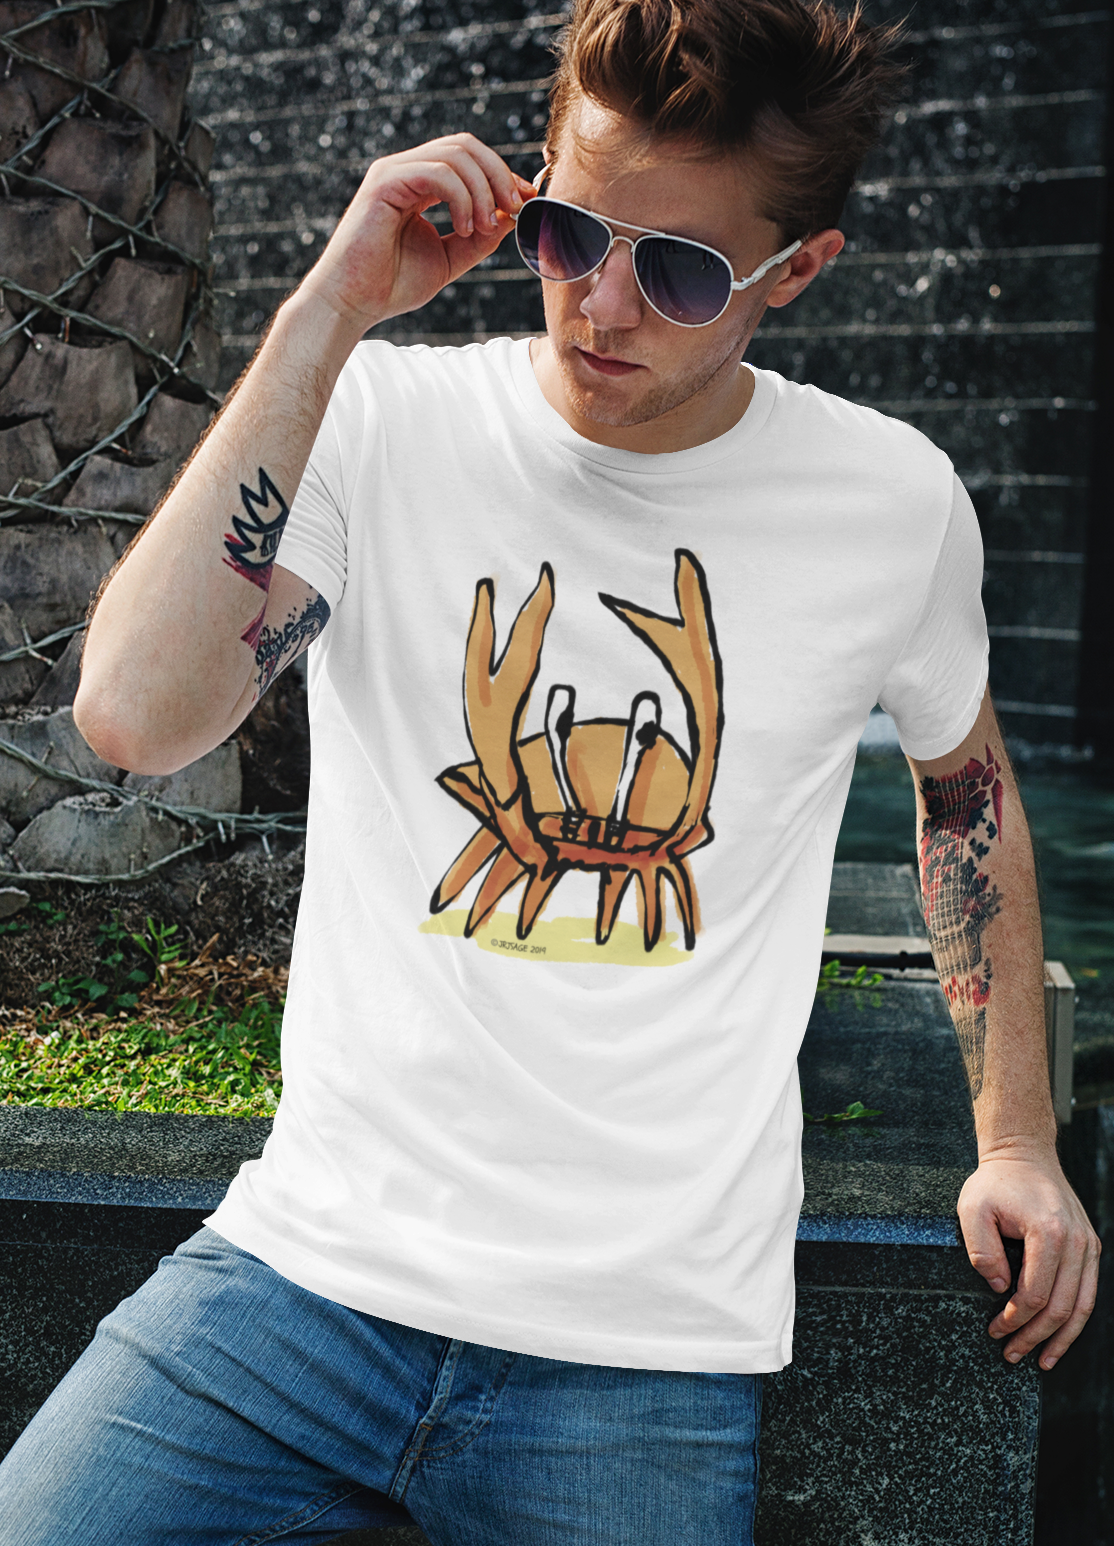 Crab T-shirt - Young man wearing a illustrated funny Angry Crab t-shirt design by Hector and Bone